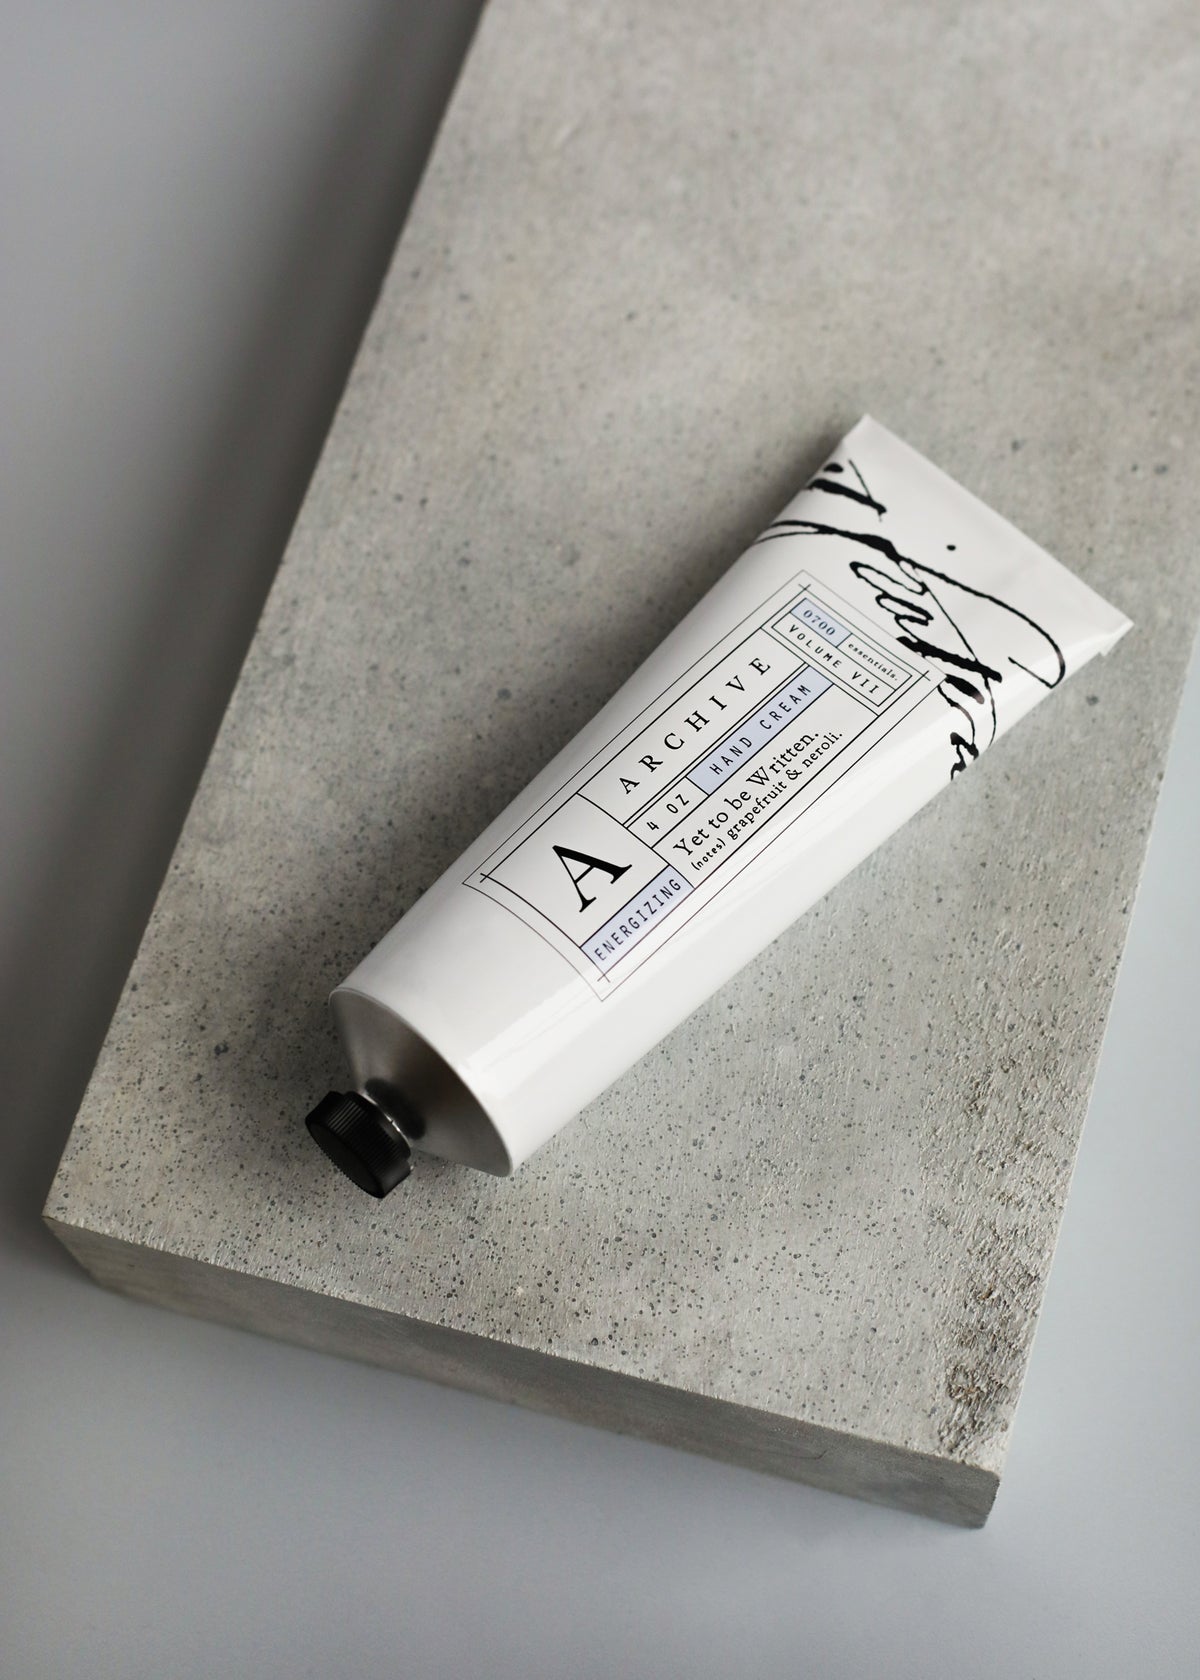 A minimalist tube of ARCHIVE by Margot Elena - Yet to be Written Hand Cream with elegant black and white labeling, featuring revitalizing citrus, resting on a gray stone surface with a soft shadow.